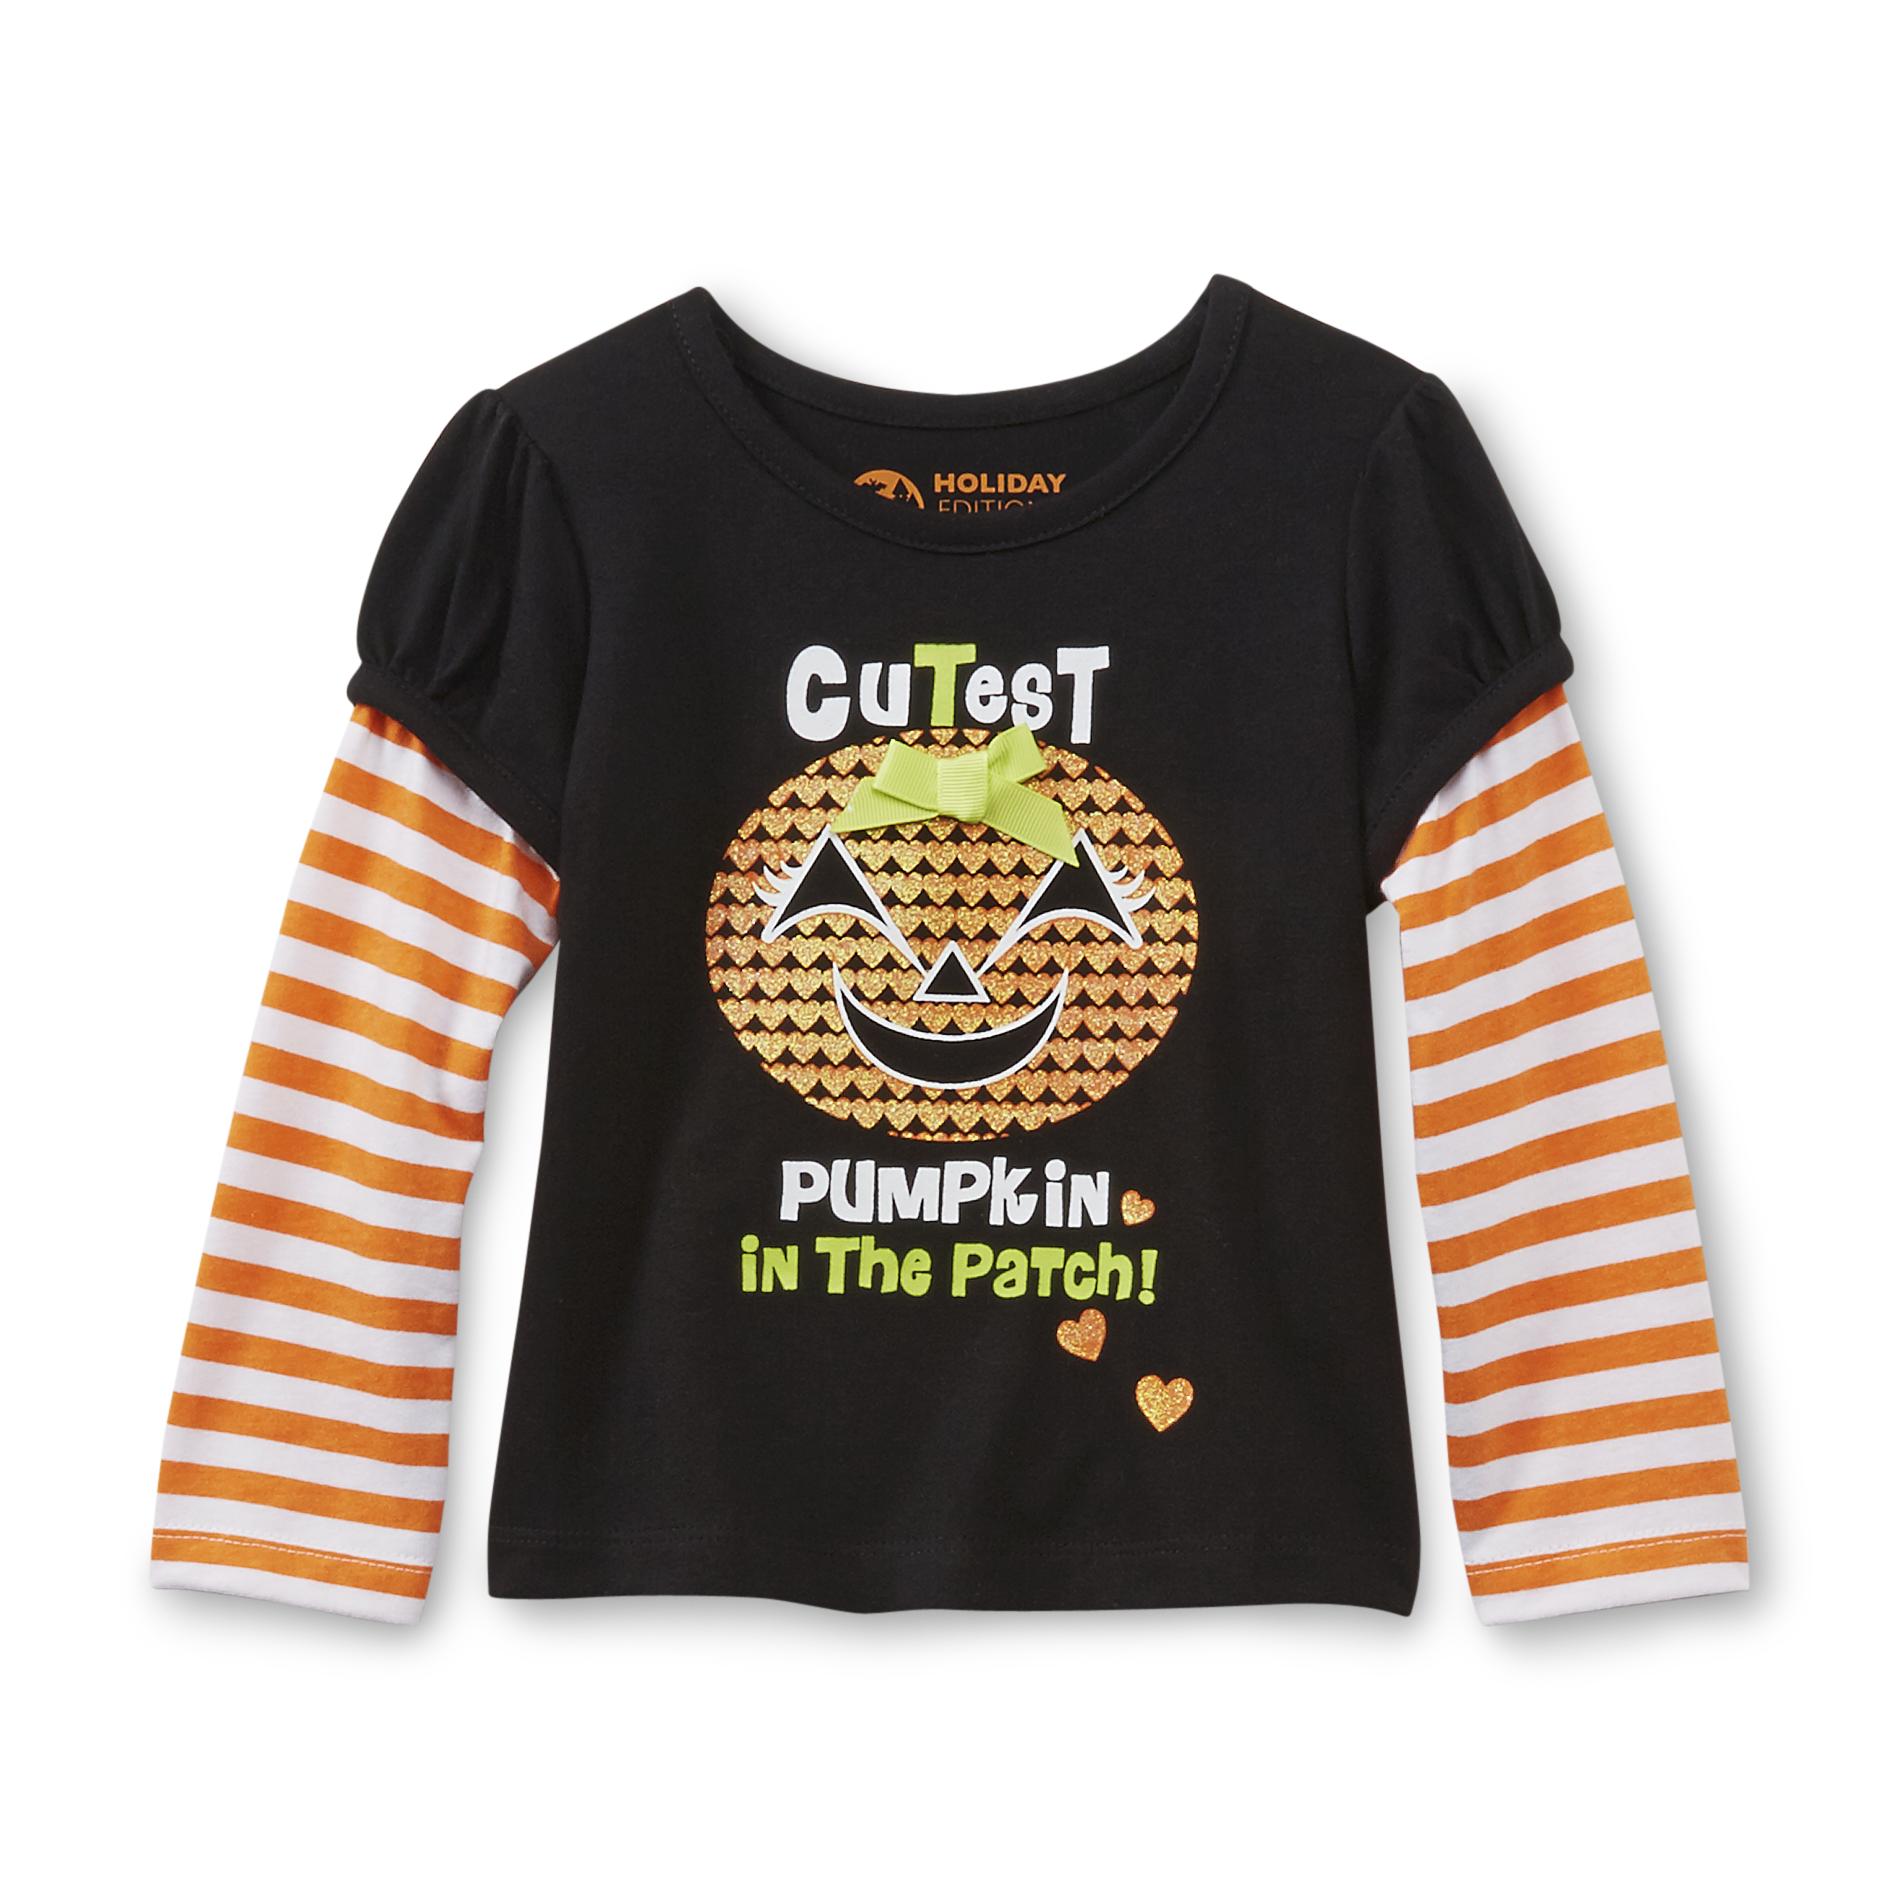 Holiday Editions Halloween Infant & Toddler Girl's Layered-Look Top - Pumpkin